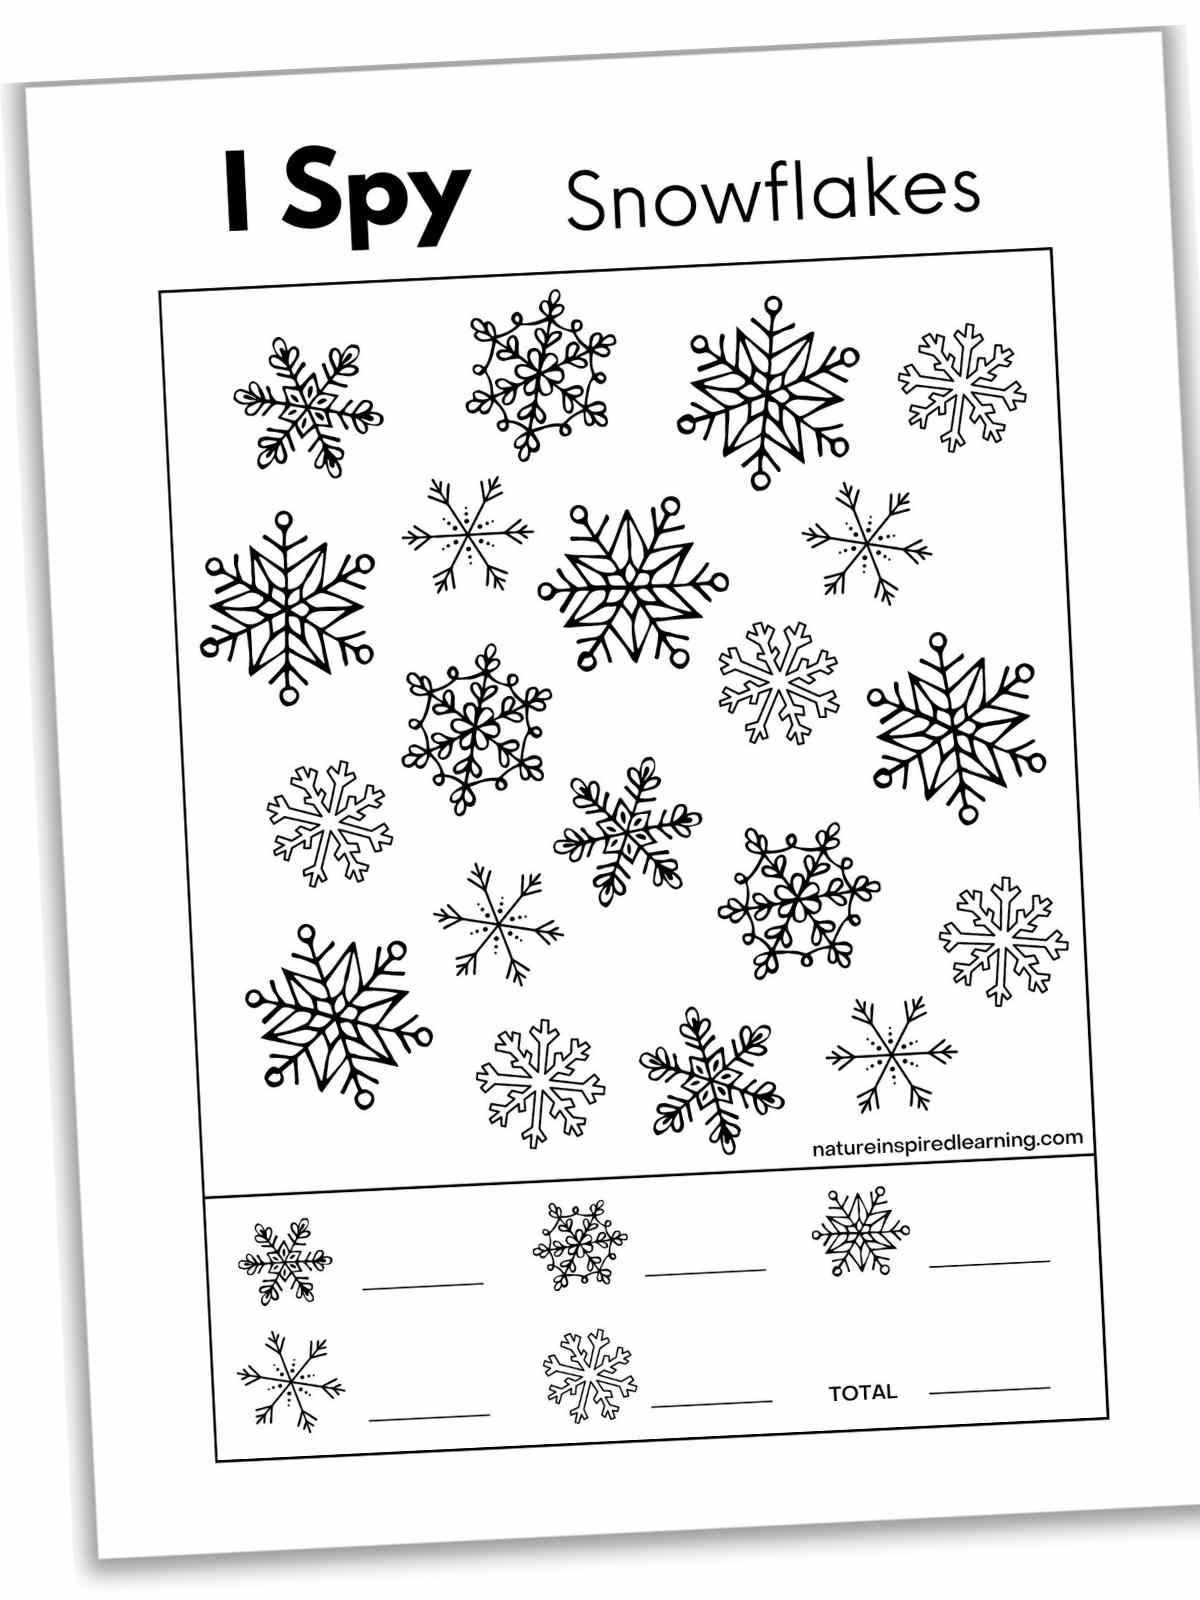 Black and white I spy worksheet with different snowflakes with a key at the bottom.